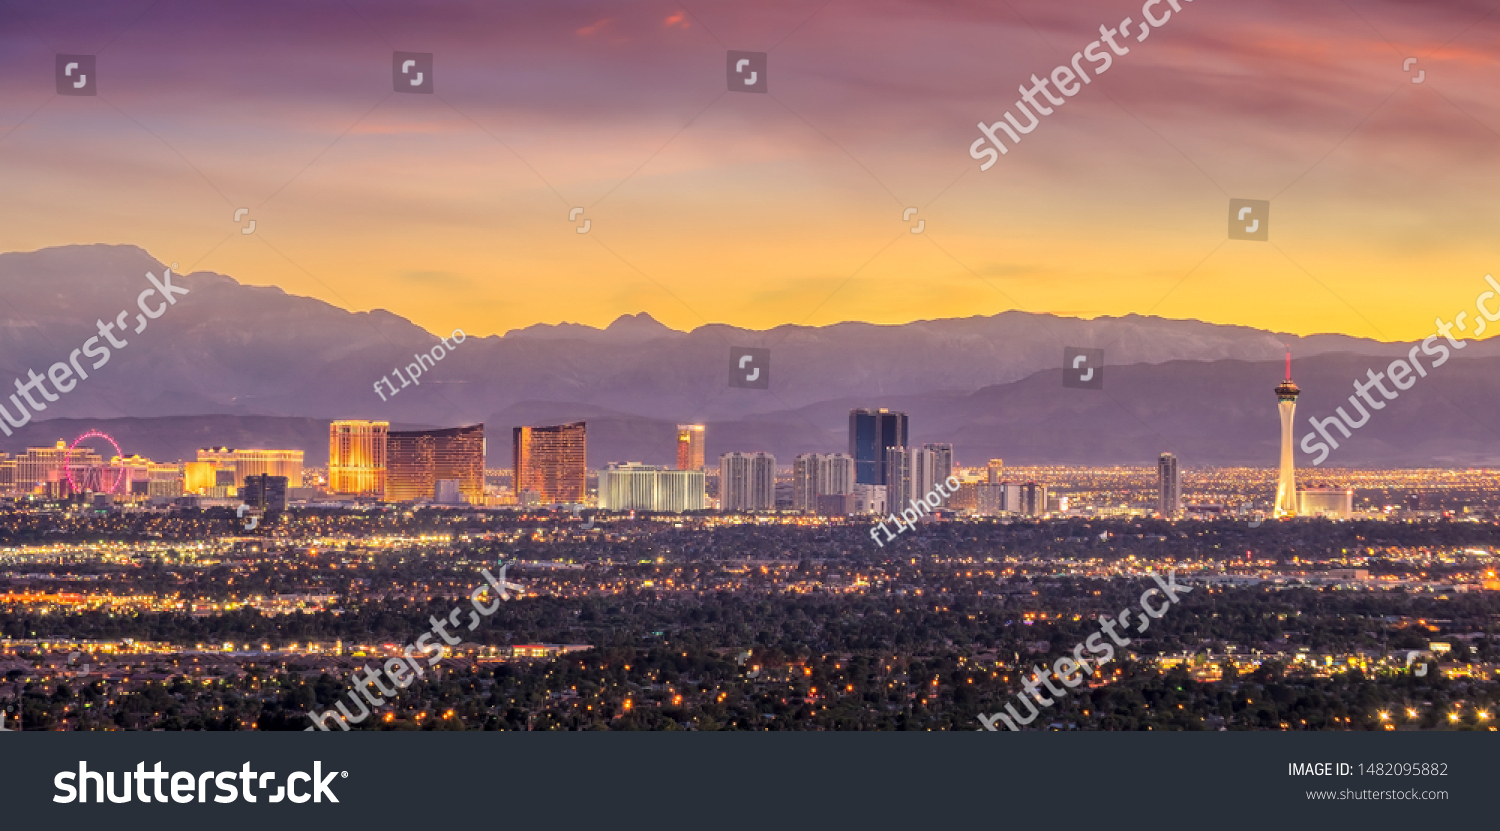 Panorama cityscape view of Las Vegas at sunset in Nevada, United States of America #1482095882